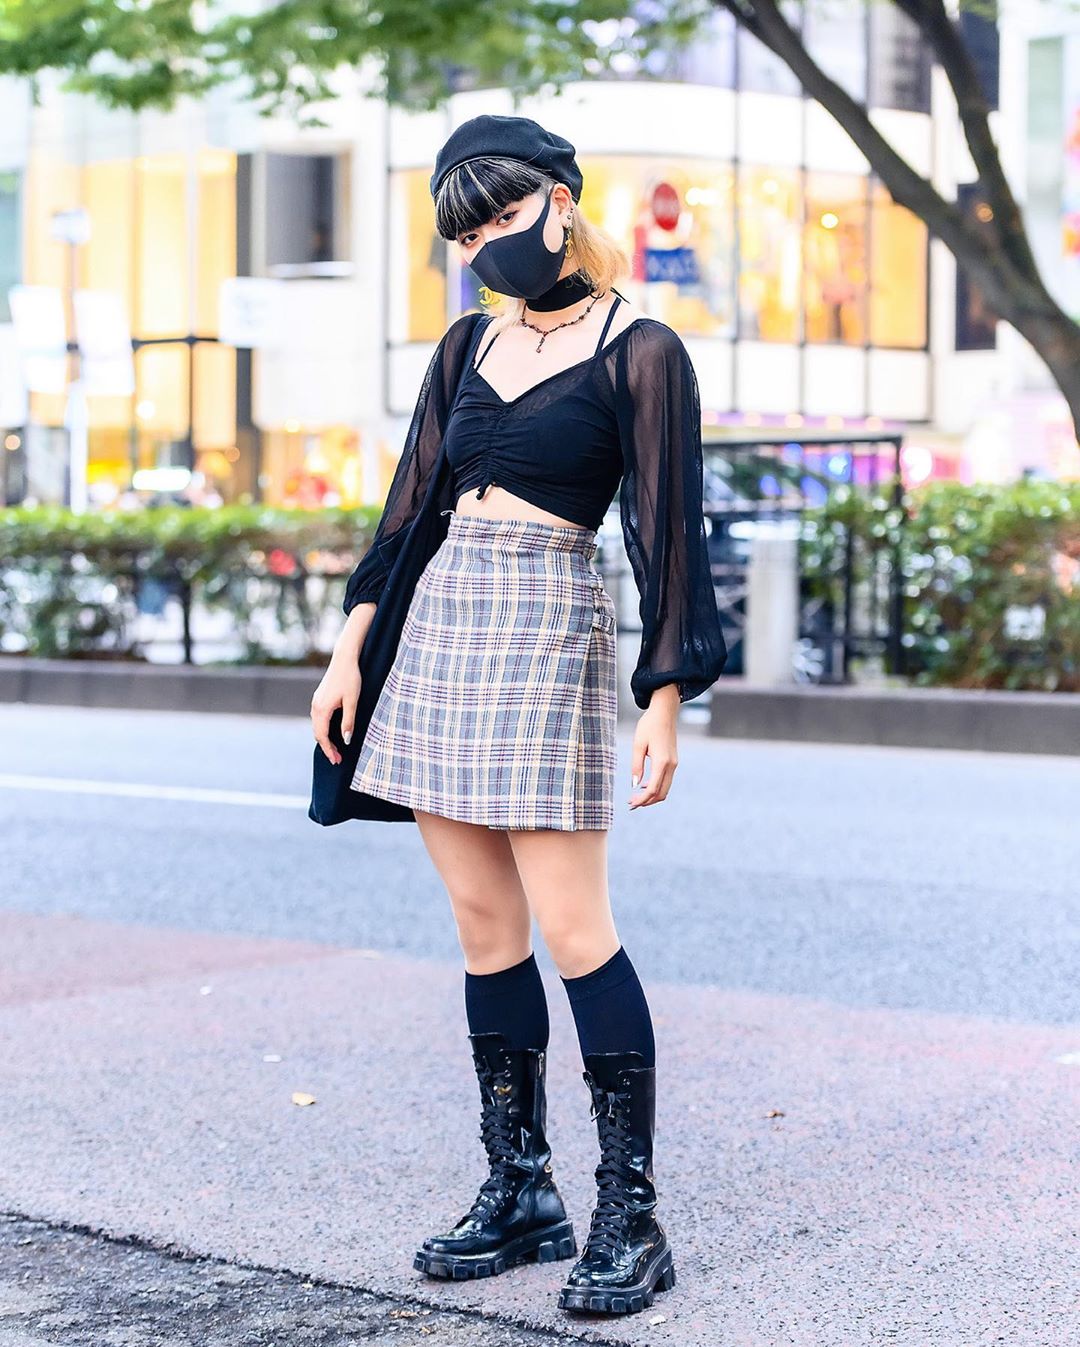 Tokyo Fashion: 20-year-old Japanese student and dancer Shion (@tic_tic ...